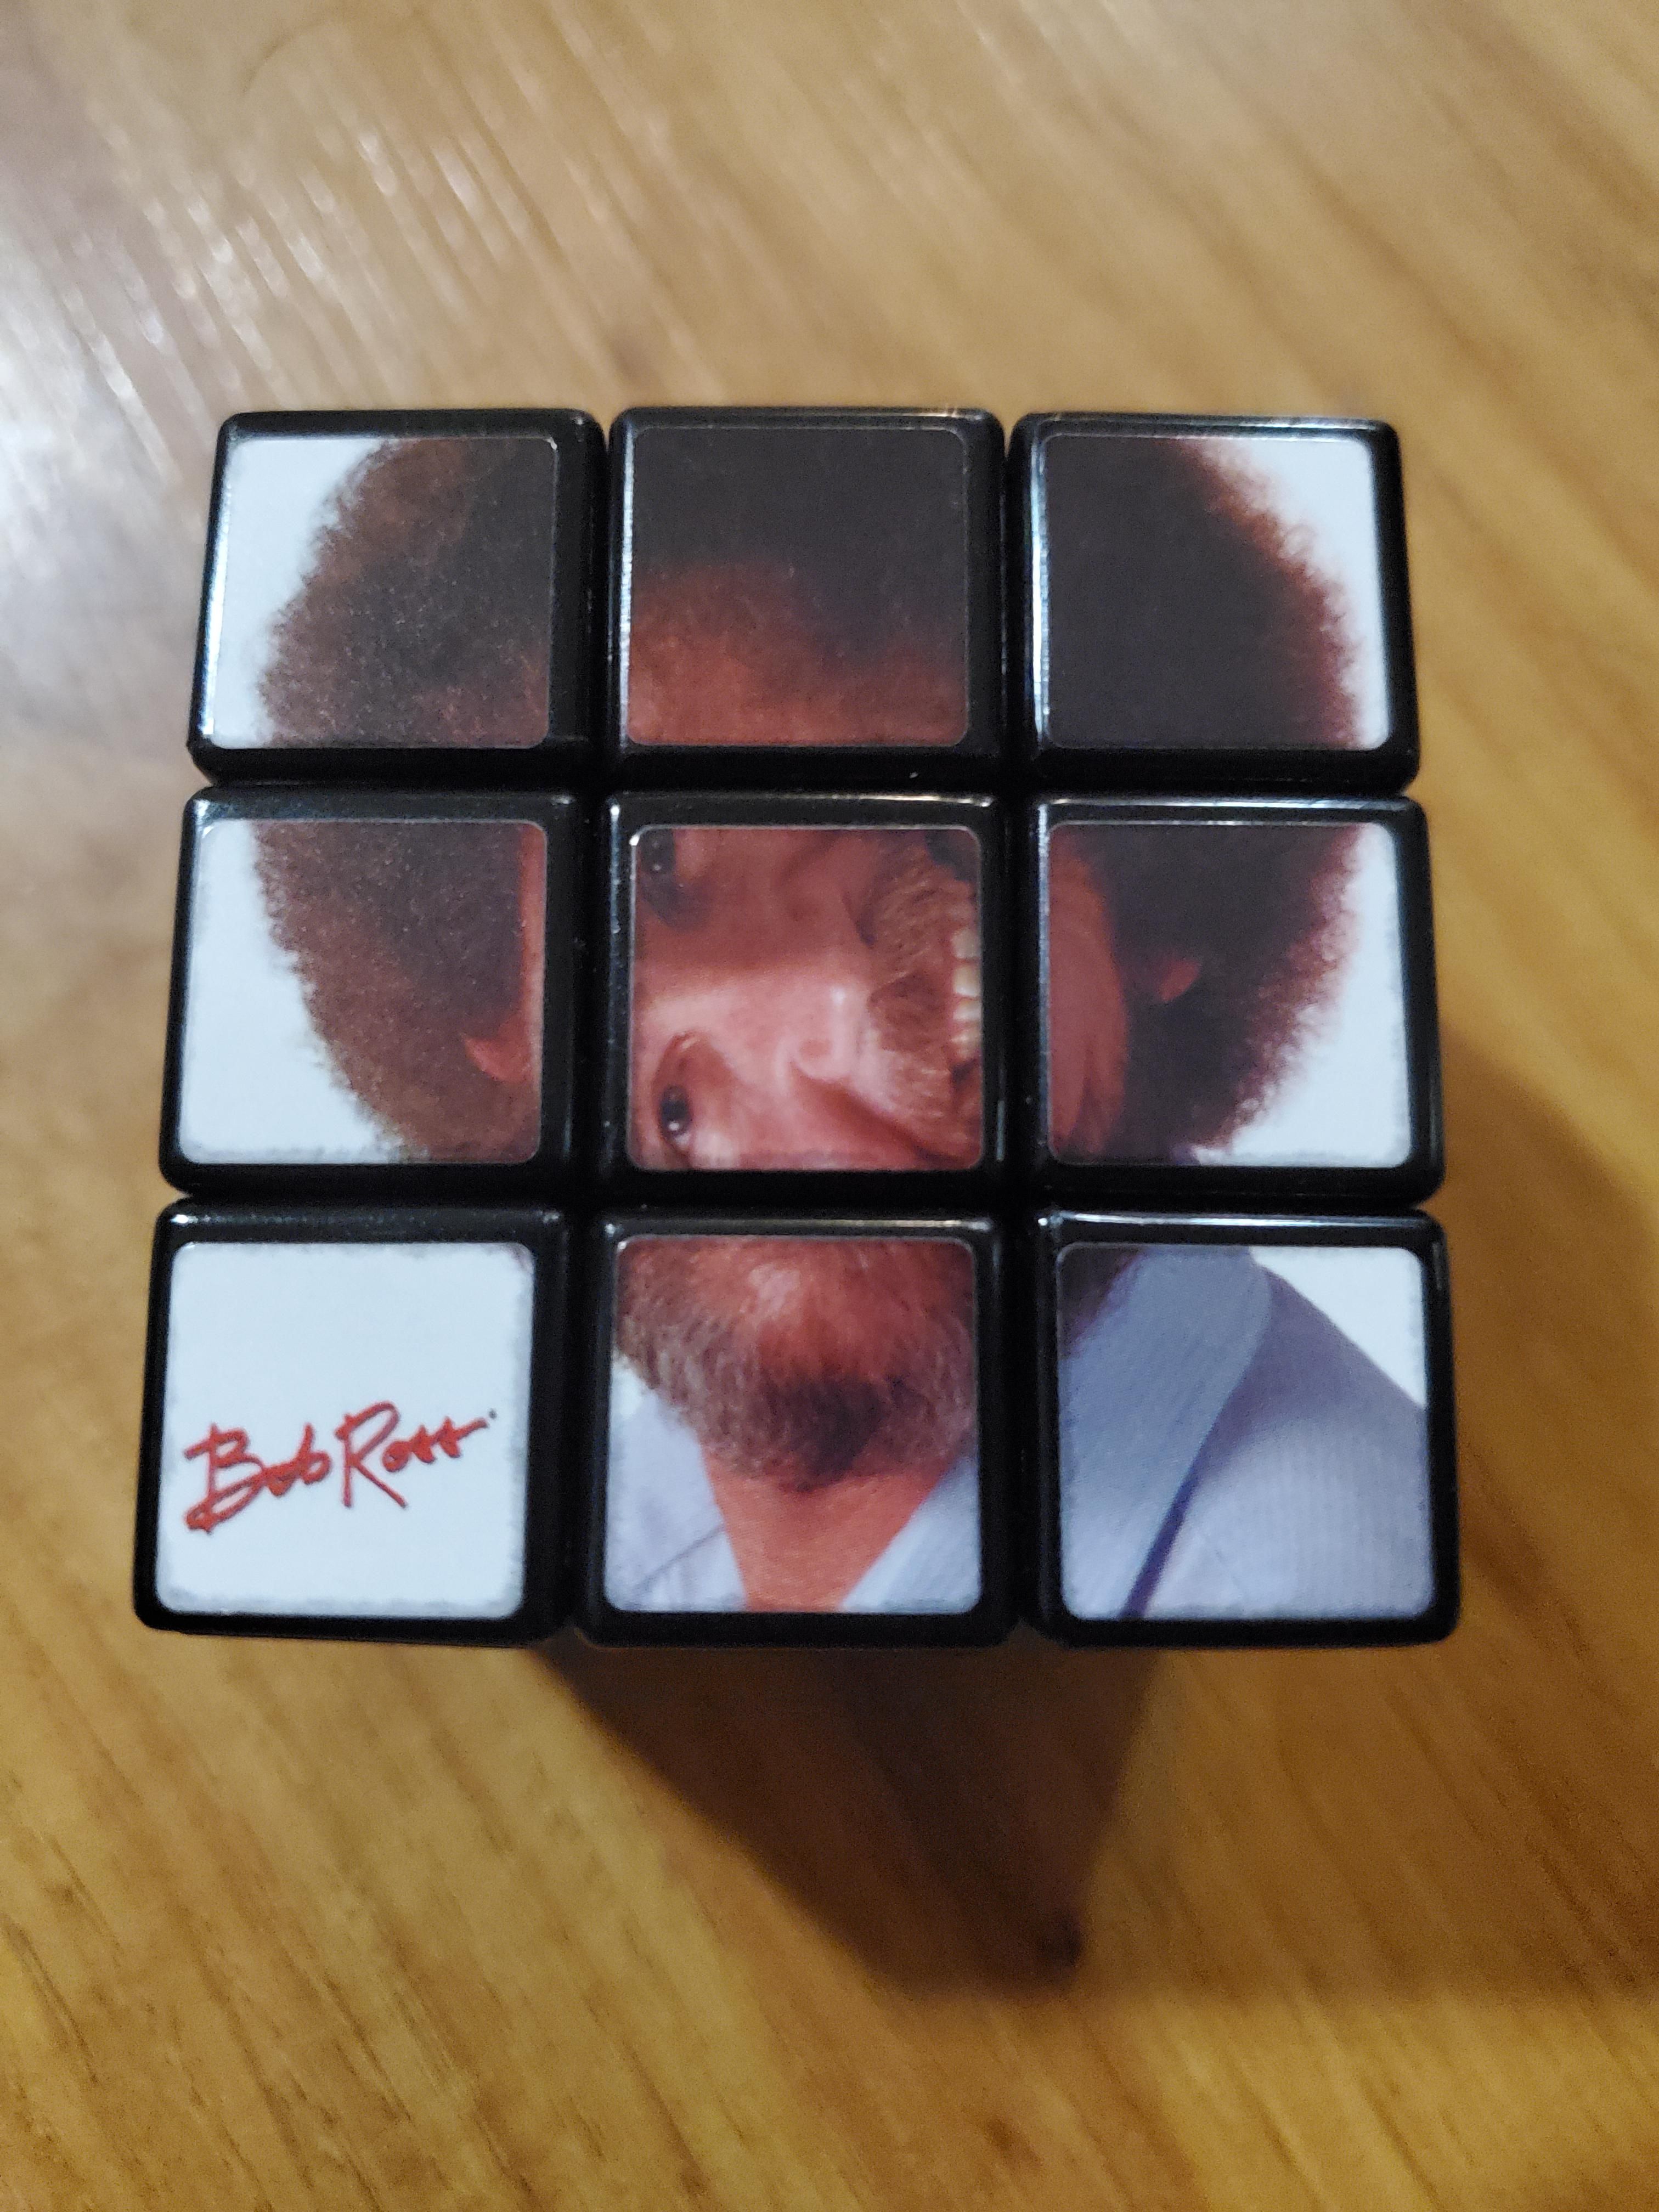 Got a Bob Ross Rubiks cube for Christmas, thought I had it figured out until....